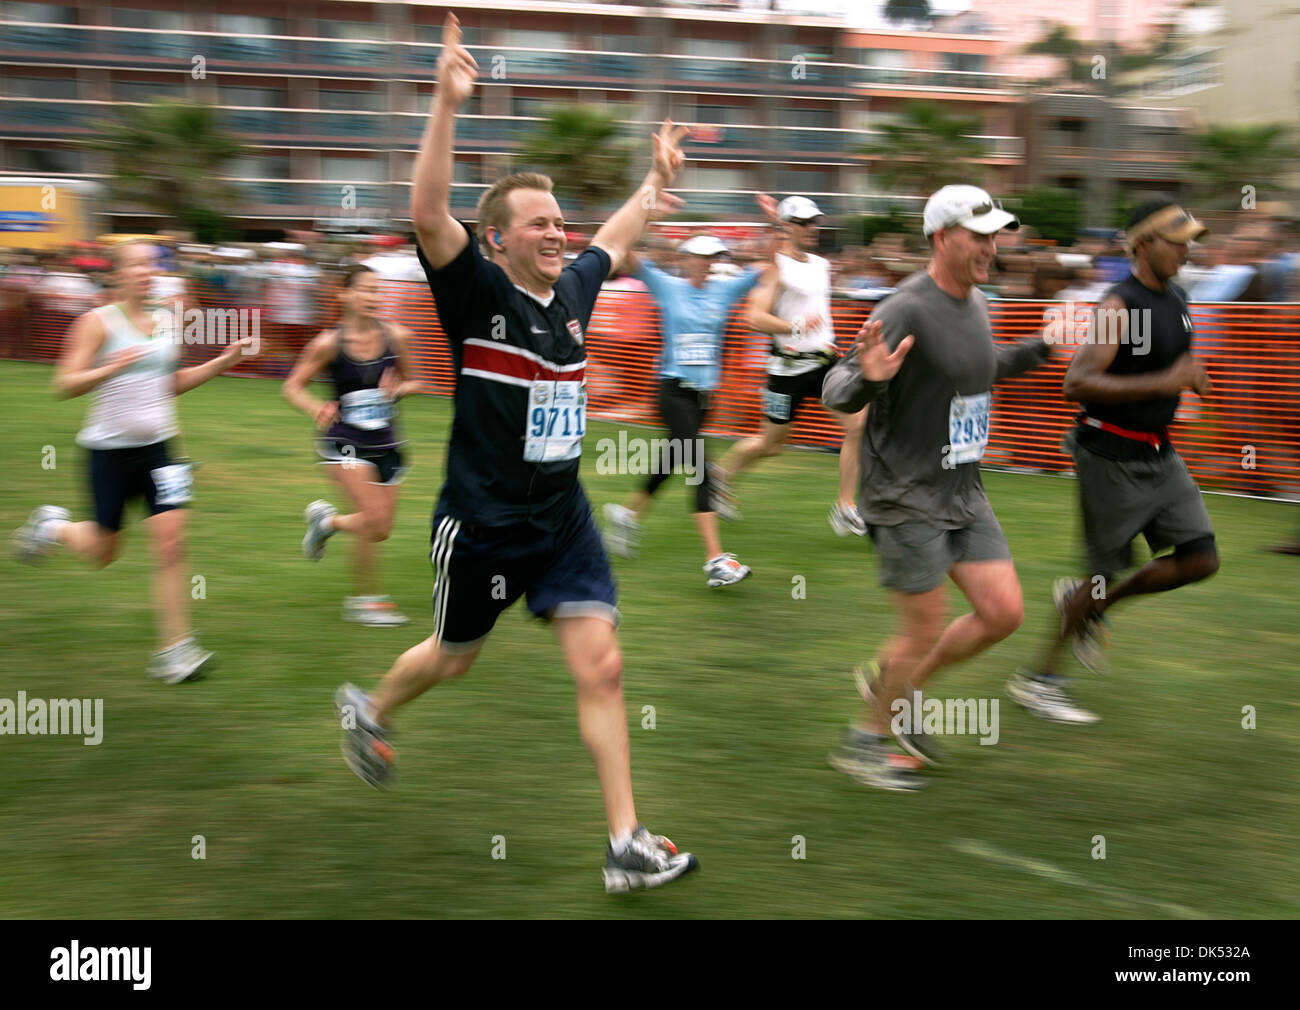 Apr. 17, 2011 - San Diego, California, USA - April 17, 2011- SAN DIEGO, CA-Mark (cq) Stickel of San Diego, foreground, raises his arms as he and others get ready to cross the finish line of the La Jolla Half Marathon in Ellen Browning Scripps Park at La Jolla Cove. (Howard Lipin/San Diego Union-Tribune) Mandatory Photo Credit: HOWARD LIPIN/ San Diego Union-Tribune/ZUMA PRESS, San D Stock Photo